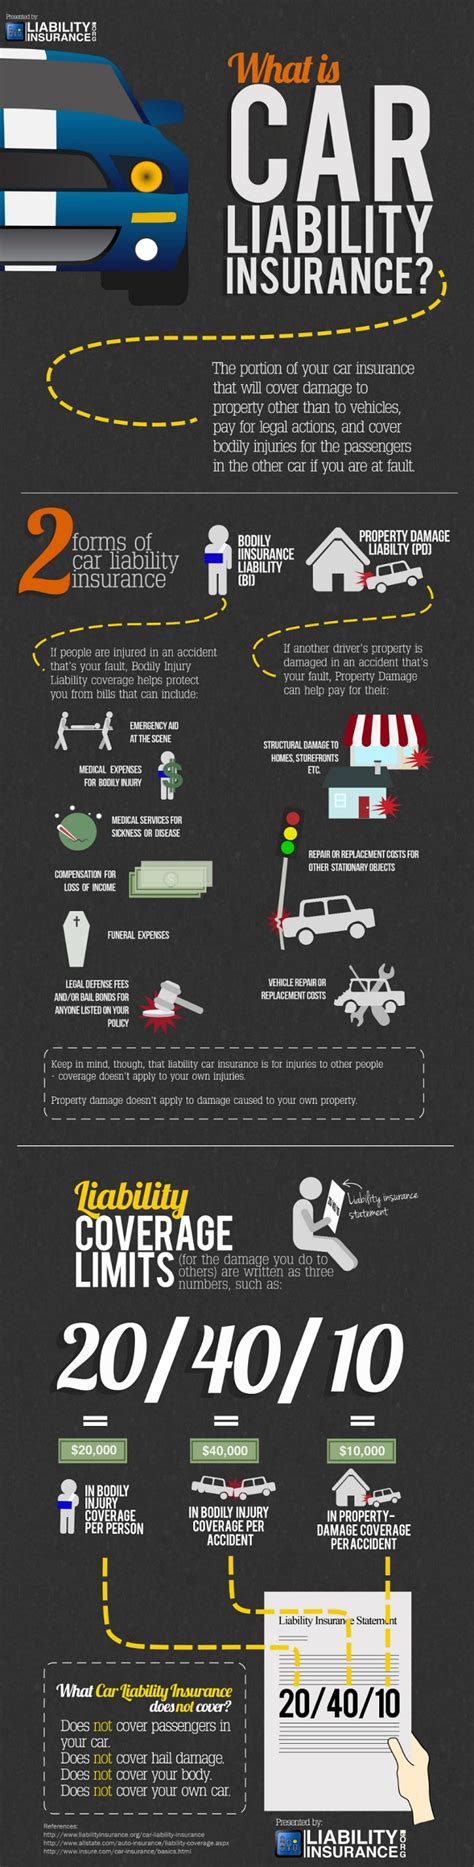 The right party bus insurance finding an insurance carrier willing to quote a party bus can be difficult. Ultimate Collection of 26 Amazing and Creatively Designed Infographics - Geeks Zine